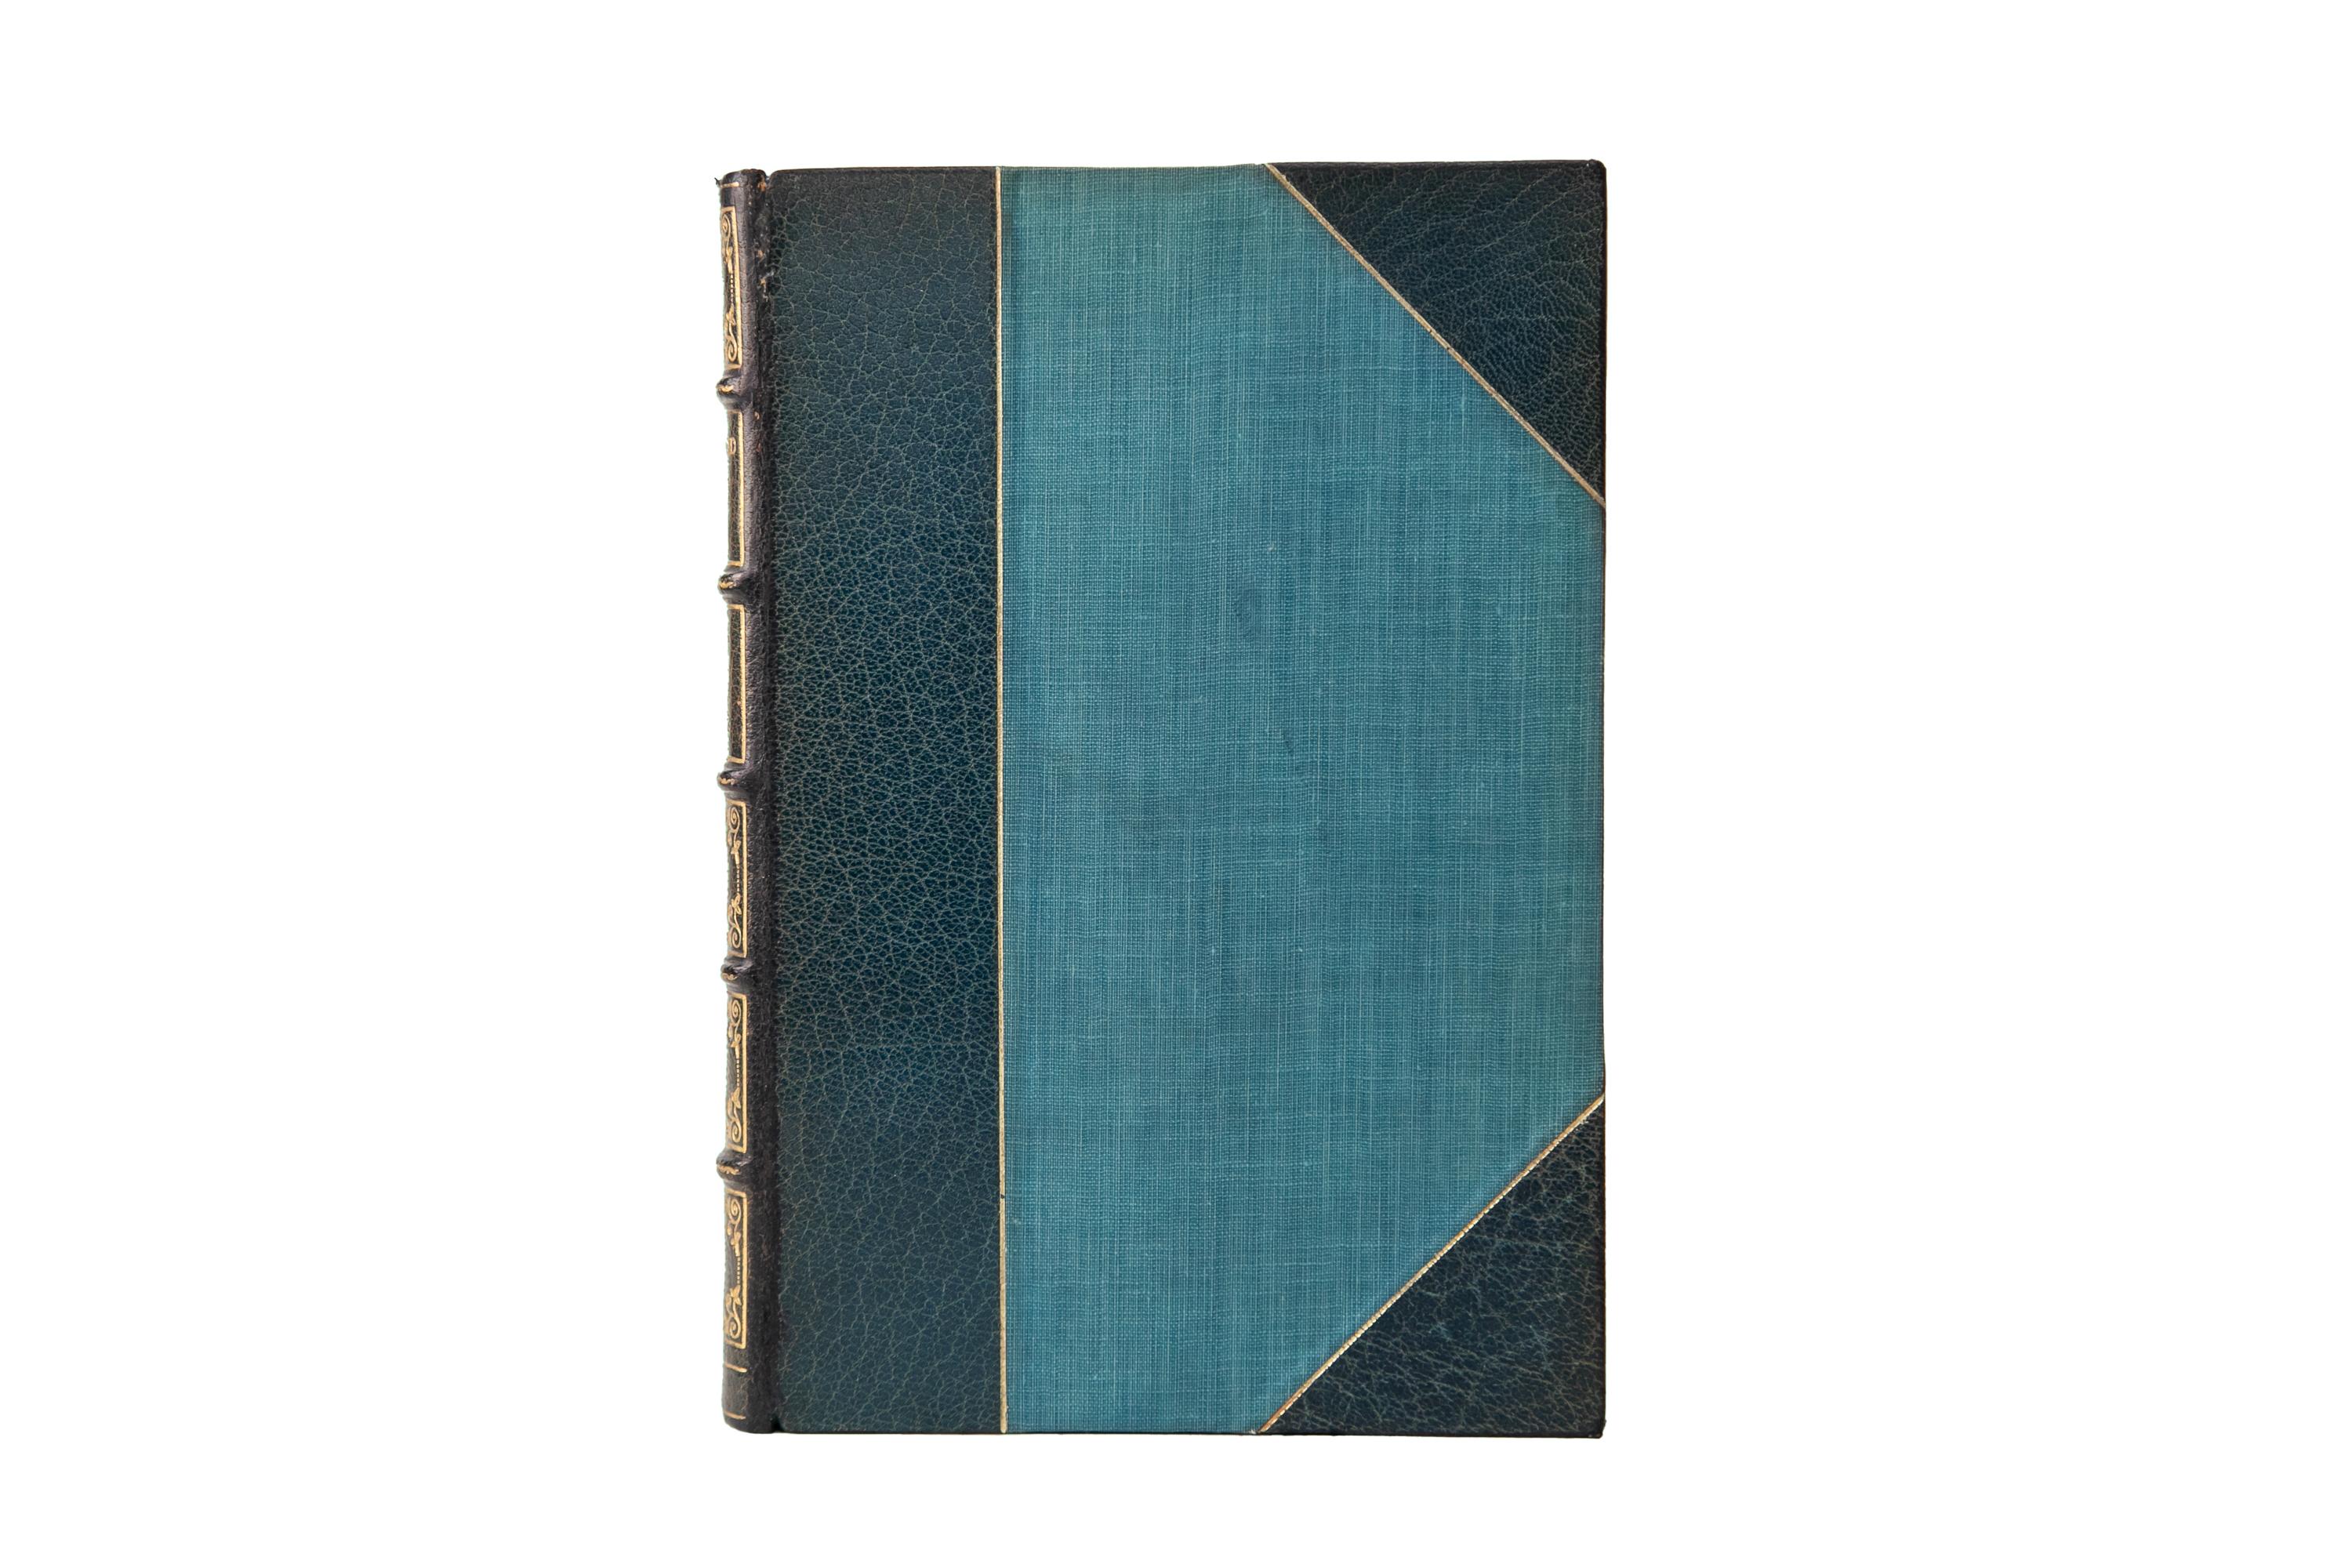 8 Volumes. Alexandre Dumas, Celebrated Crimes. Bound in 3/4 blue morocco and linen boards bordered in gilt-tooling. The spines display raised bands, bordering, label lettering, and panel details, all gilt-tooled. The top edges are gilded with